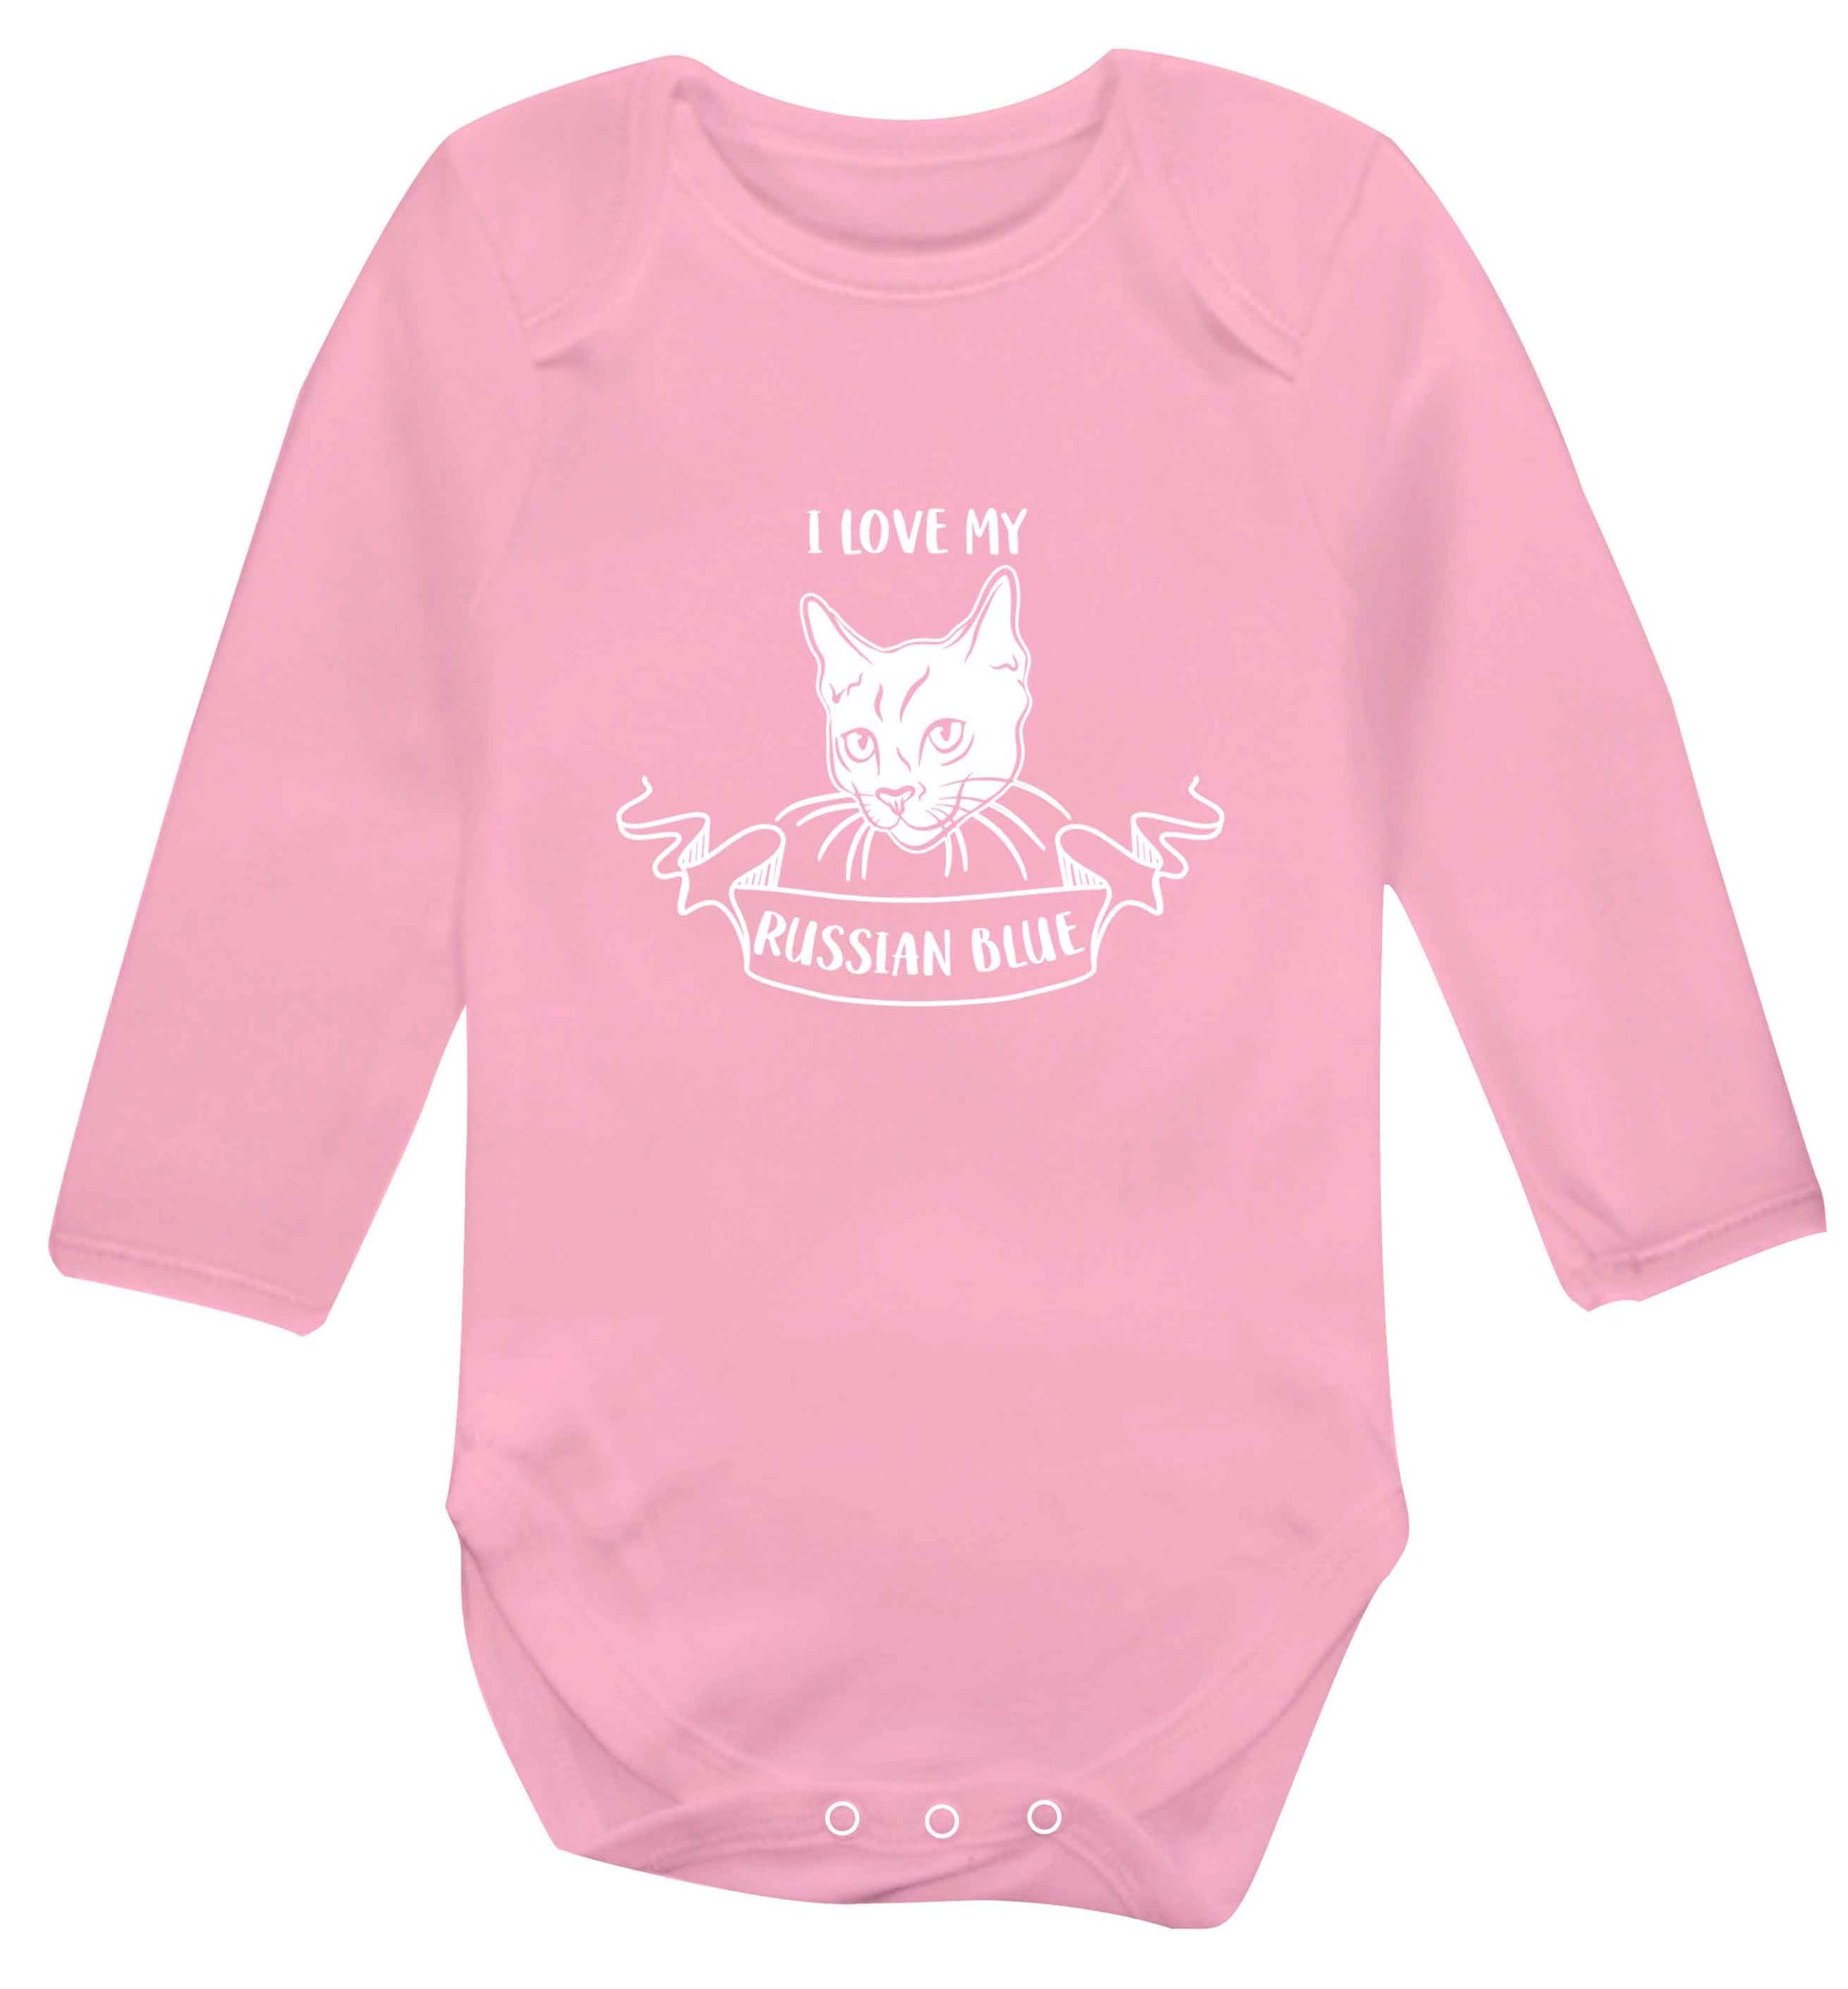 I love my russian blue baby vest long sleeved pale pink 6-12 months